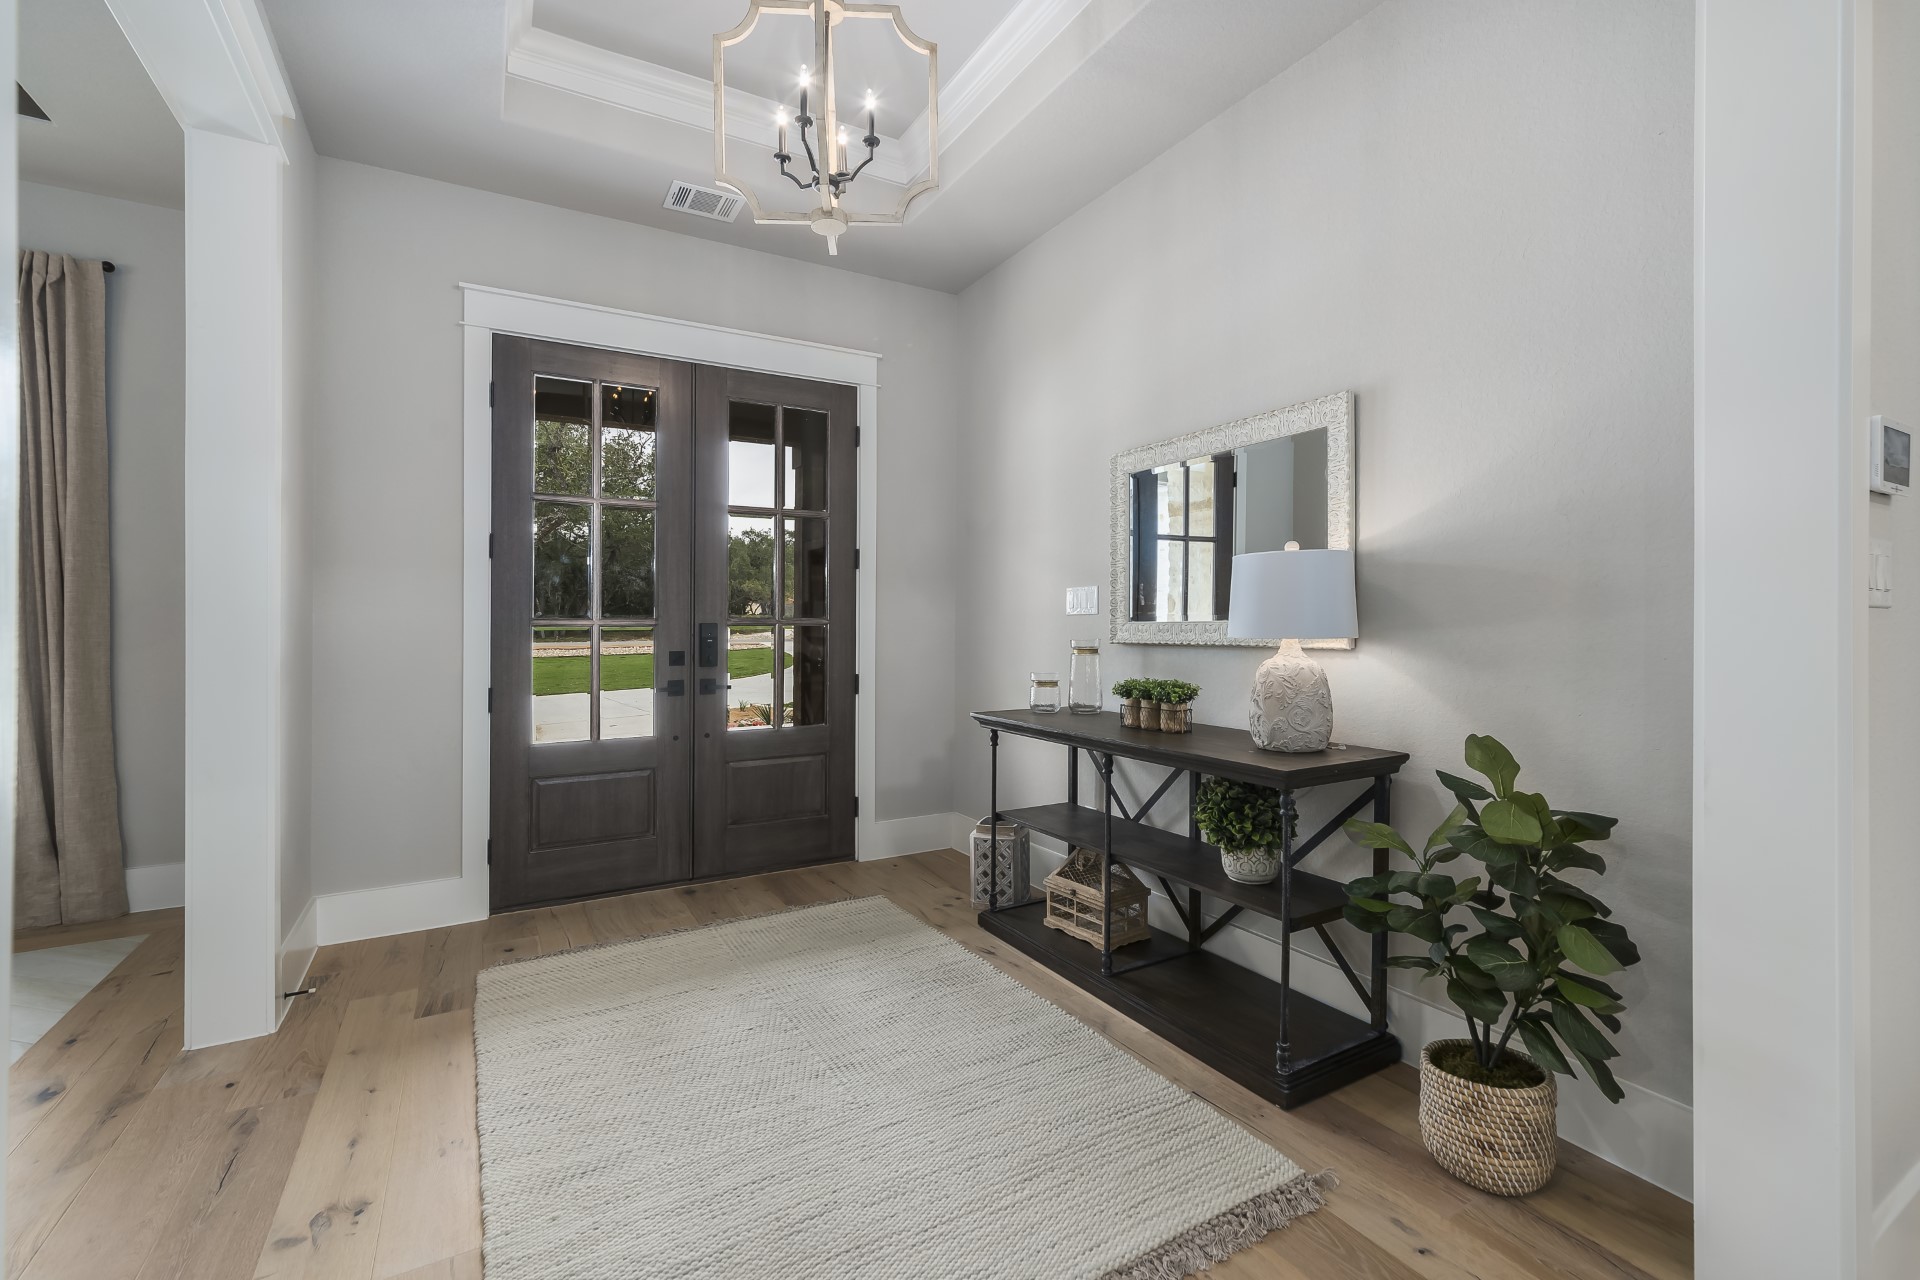 A side view of the foyer living space within the Belle Oaks custom floor plan from JLP Builders